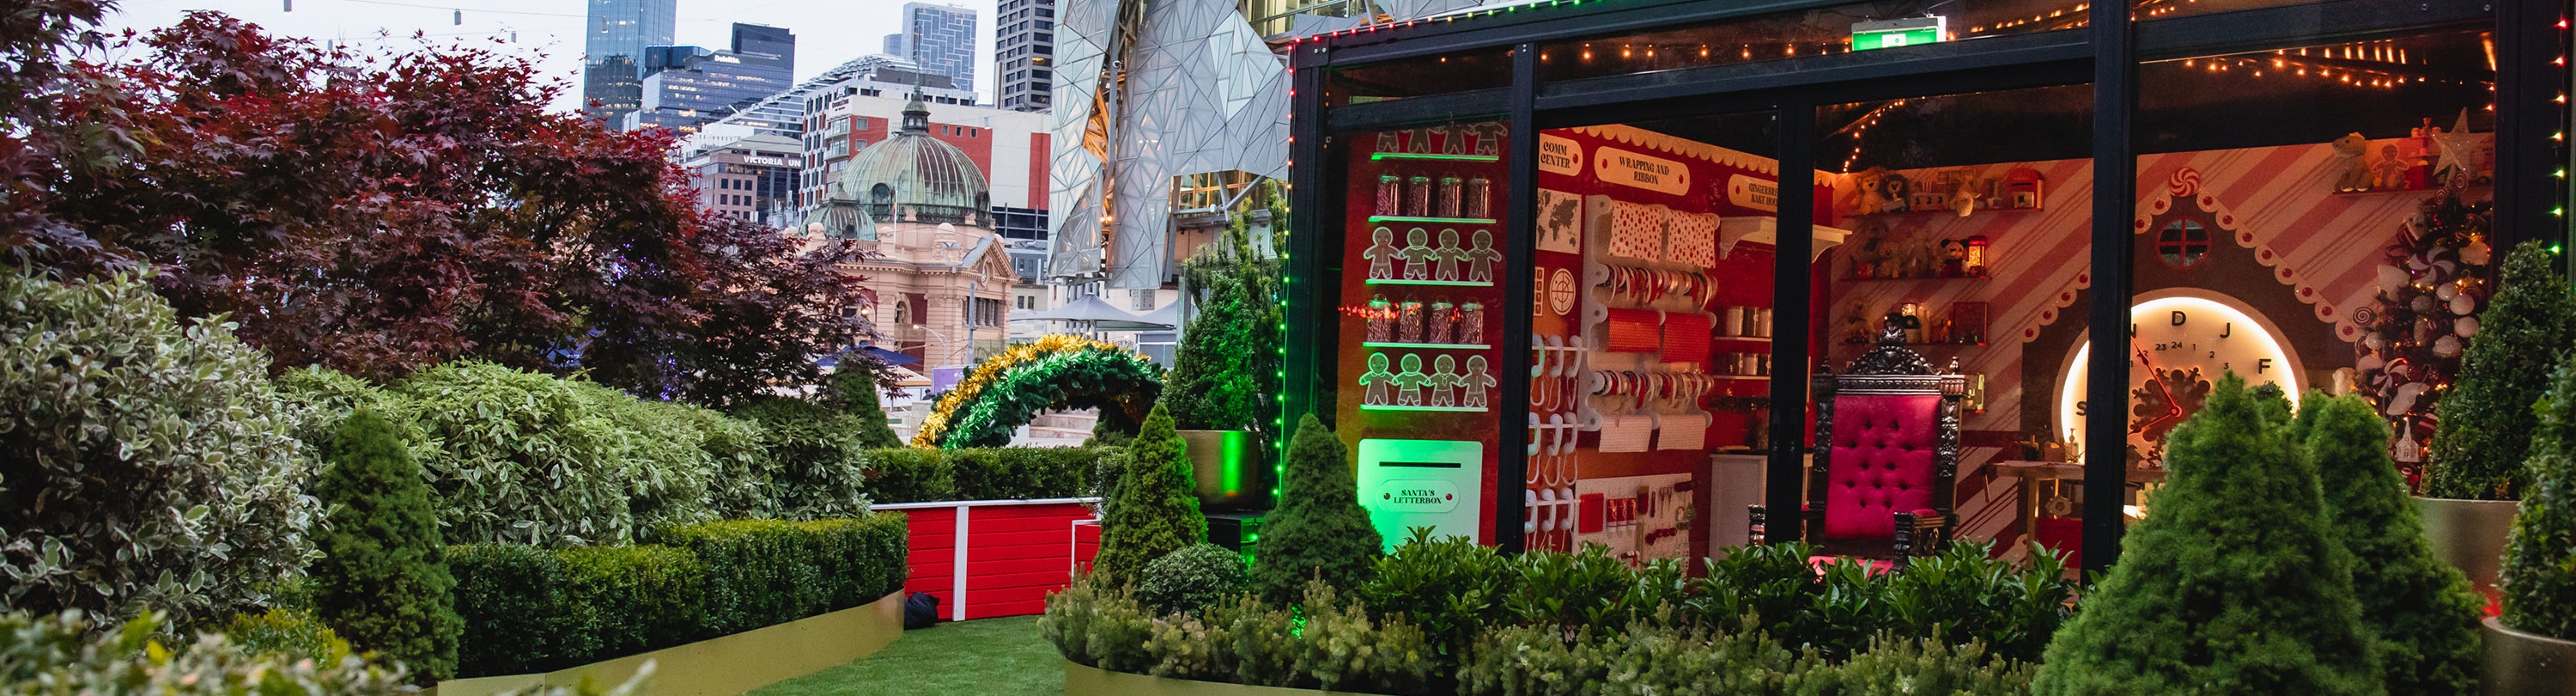 A photo of Santa's workshop with a bright red chair in the window and the workshop is surrounded by greenery in Fed Square